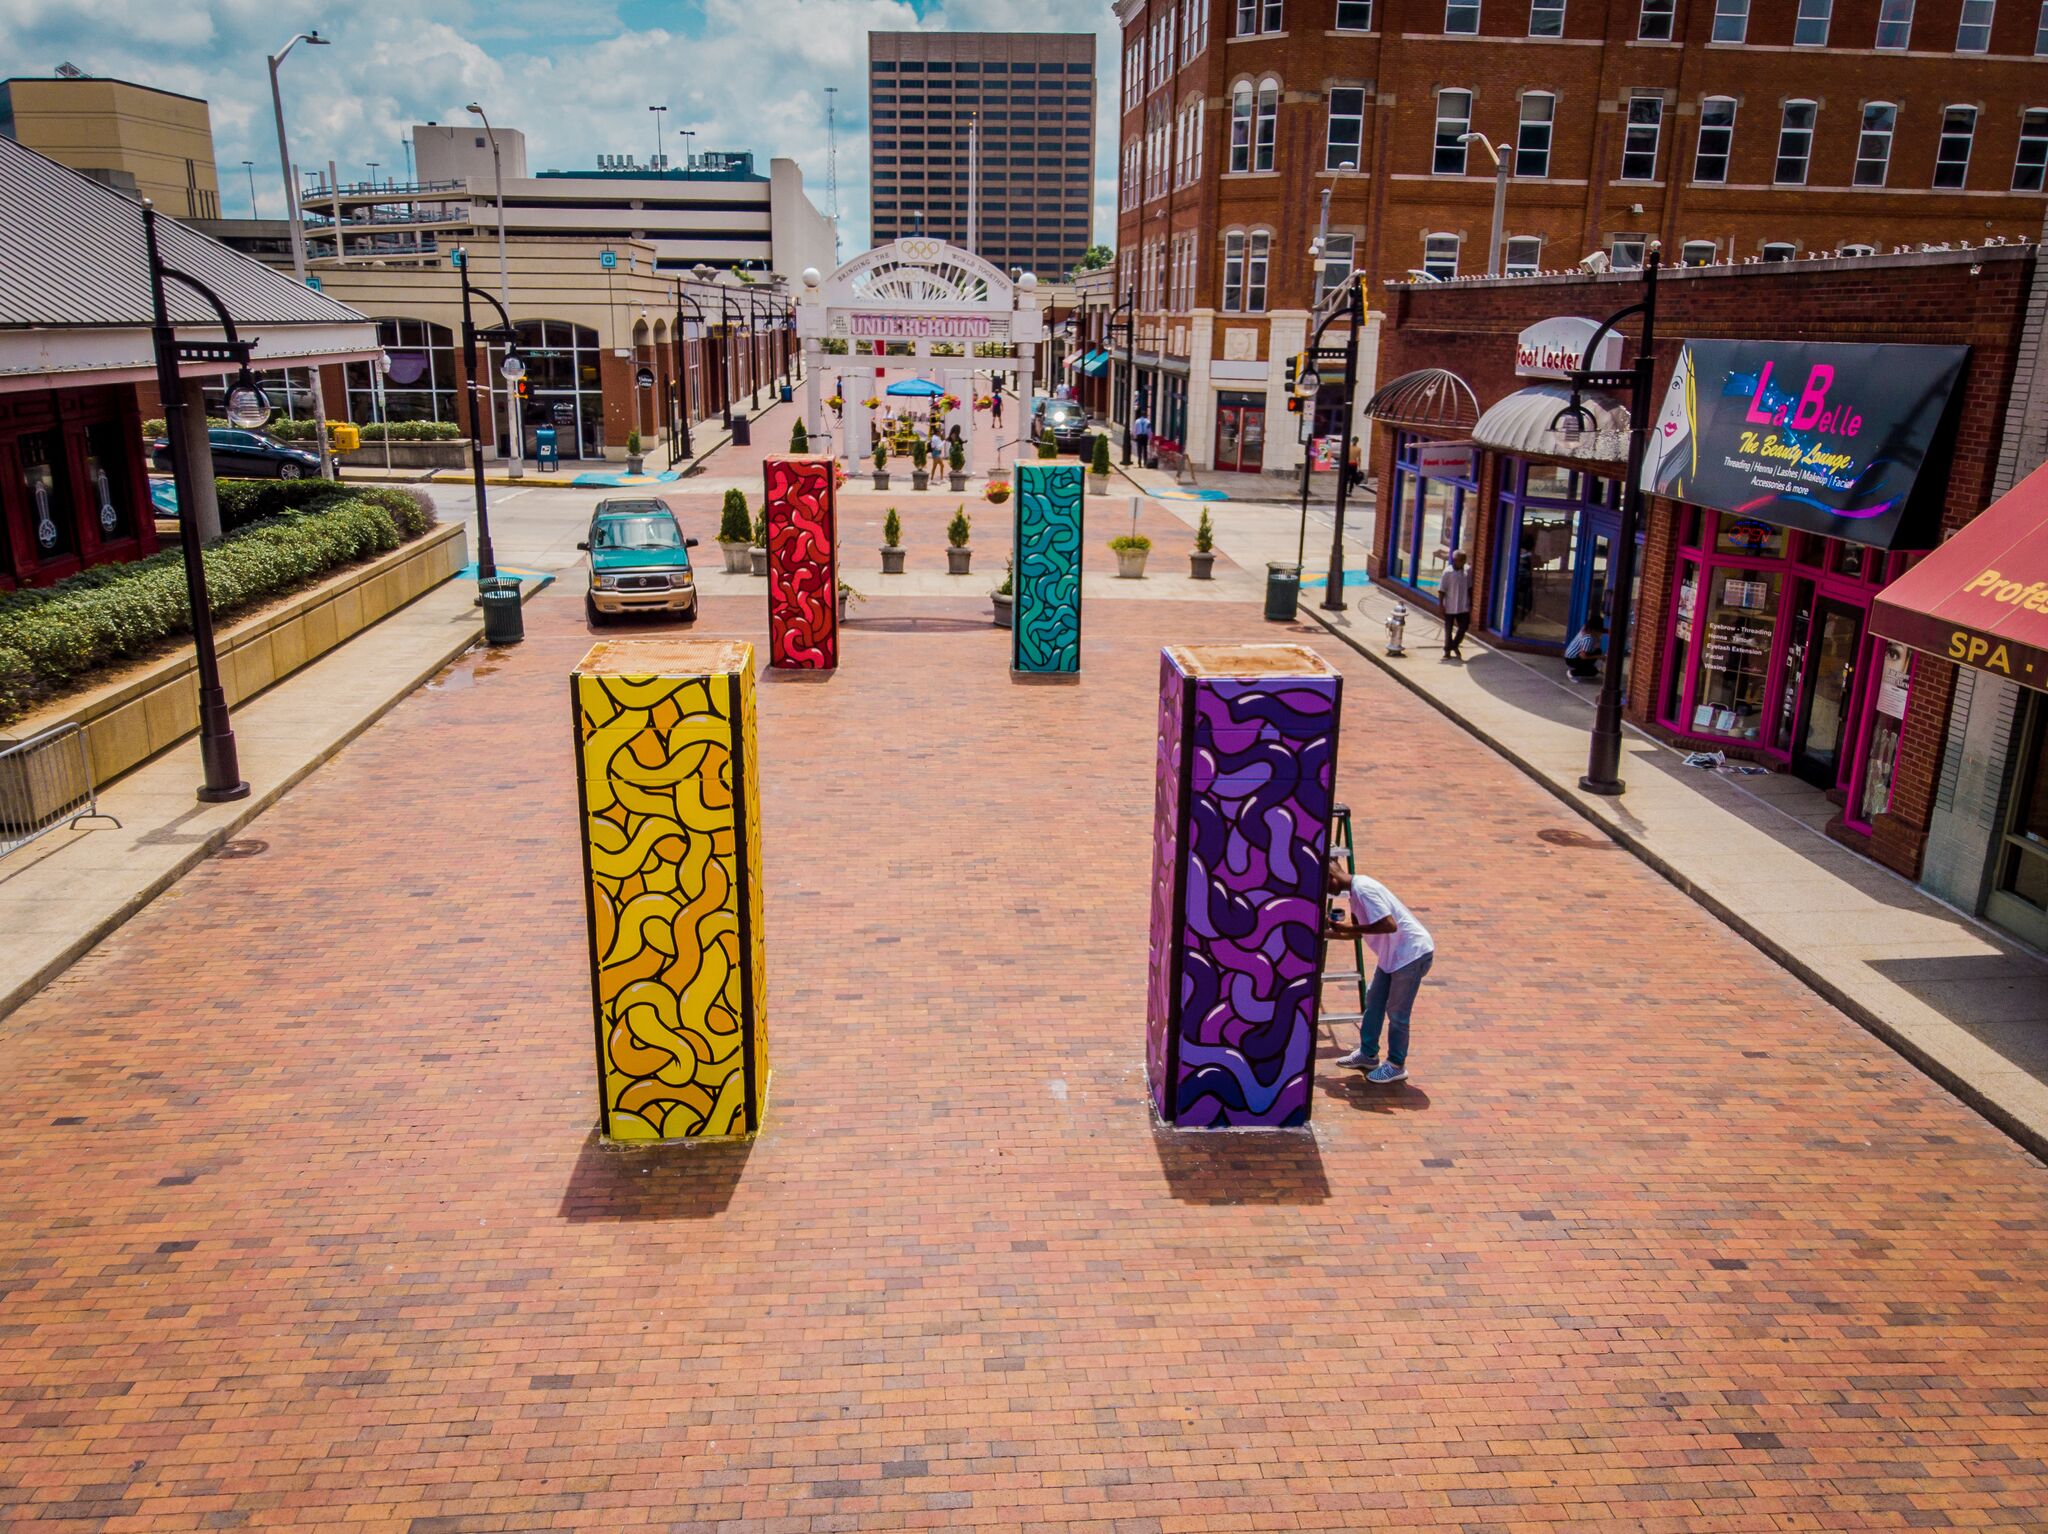 Concrete pillars decorated with public art jut up from the street level at Underground Atlanta.